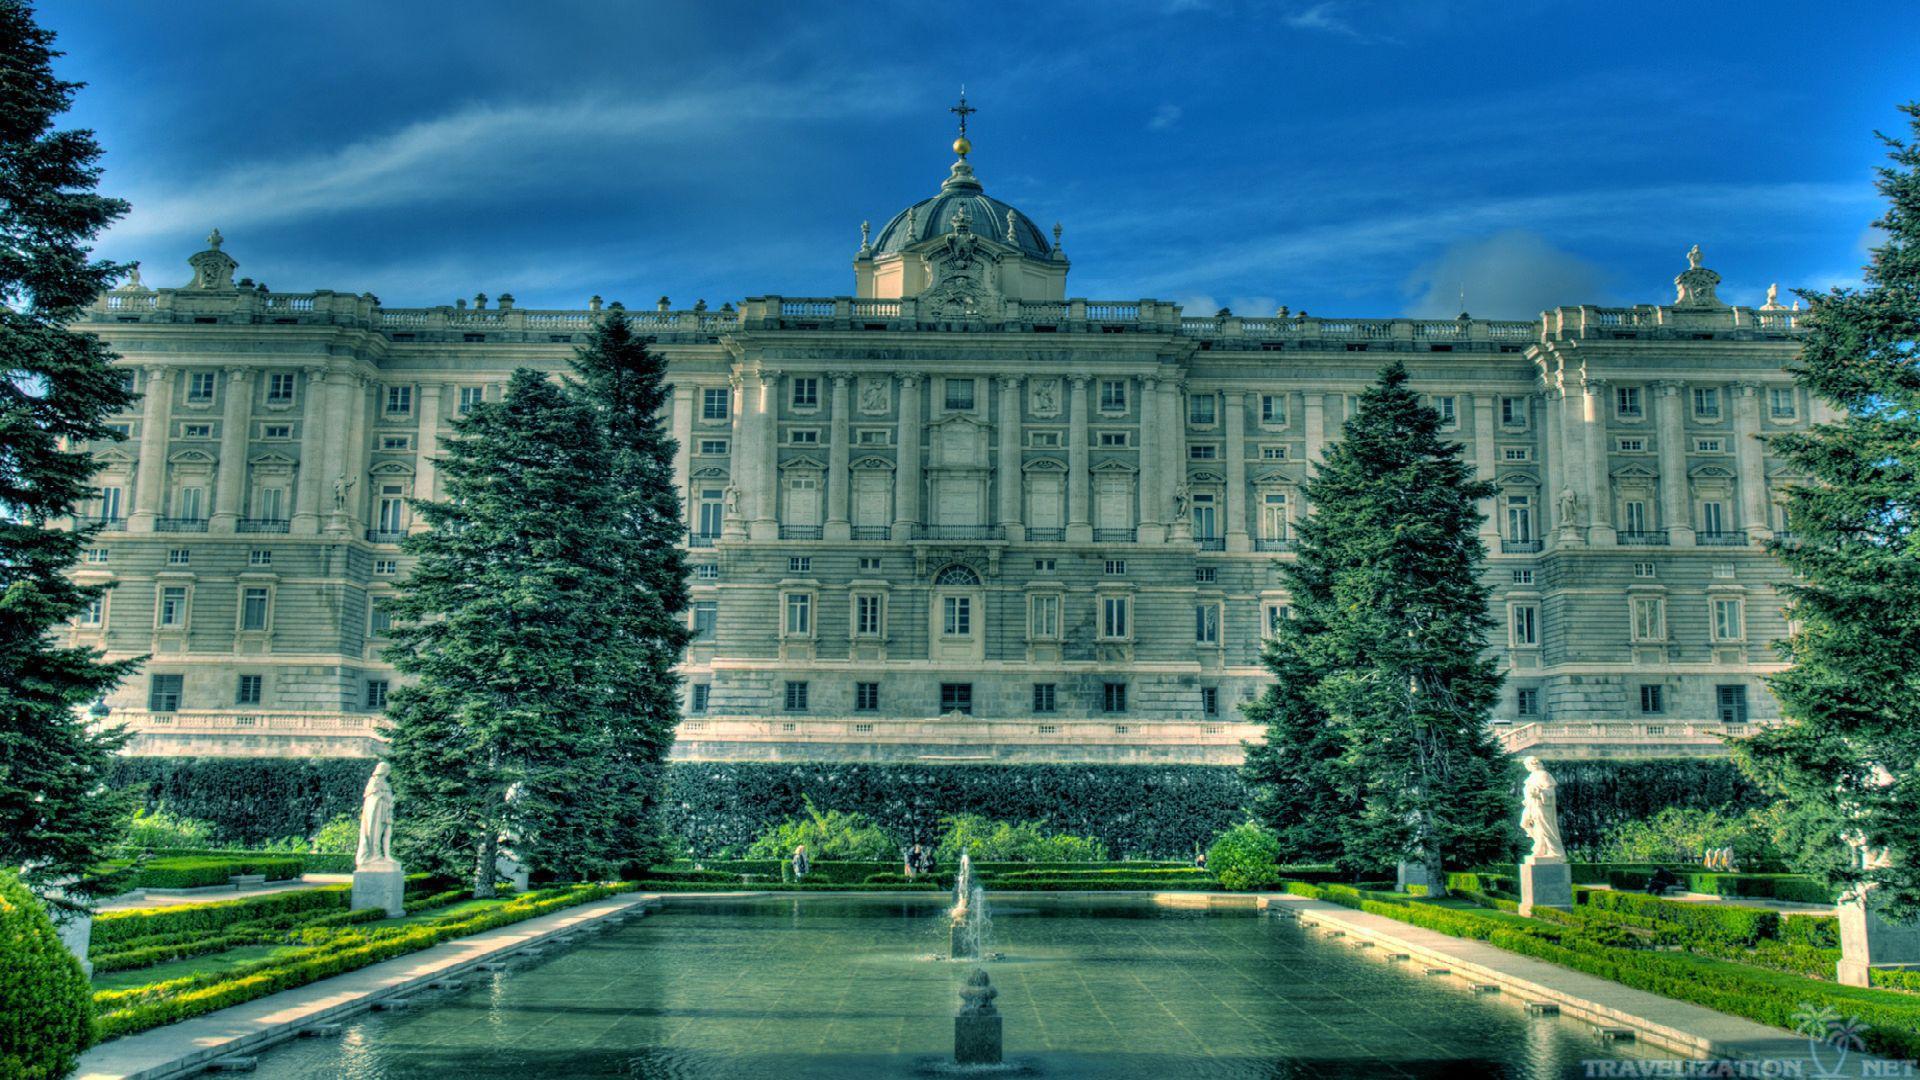 Palace of Madrid wallpaper and image, picture, photo